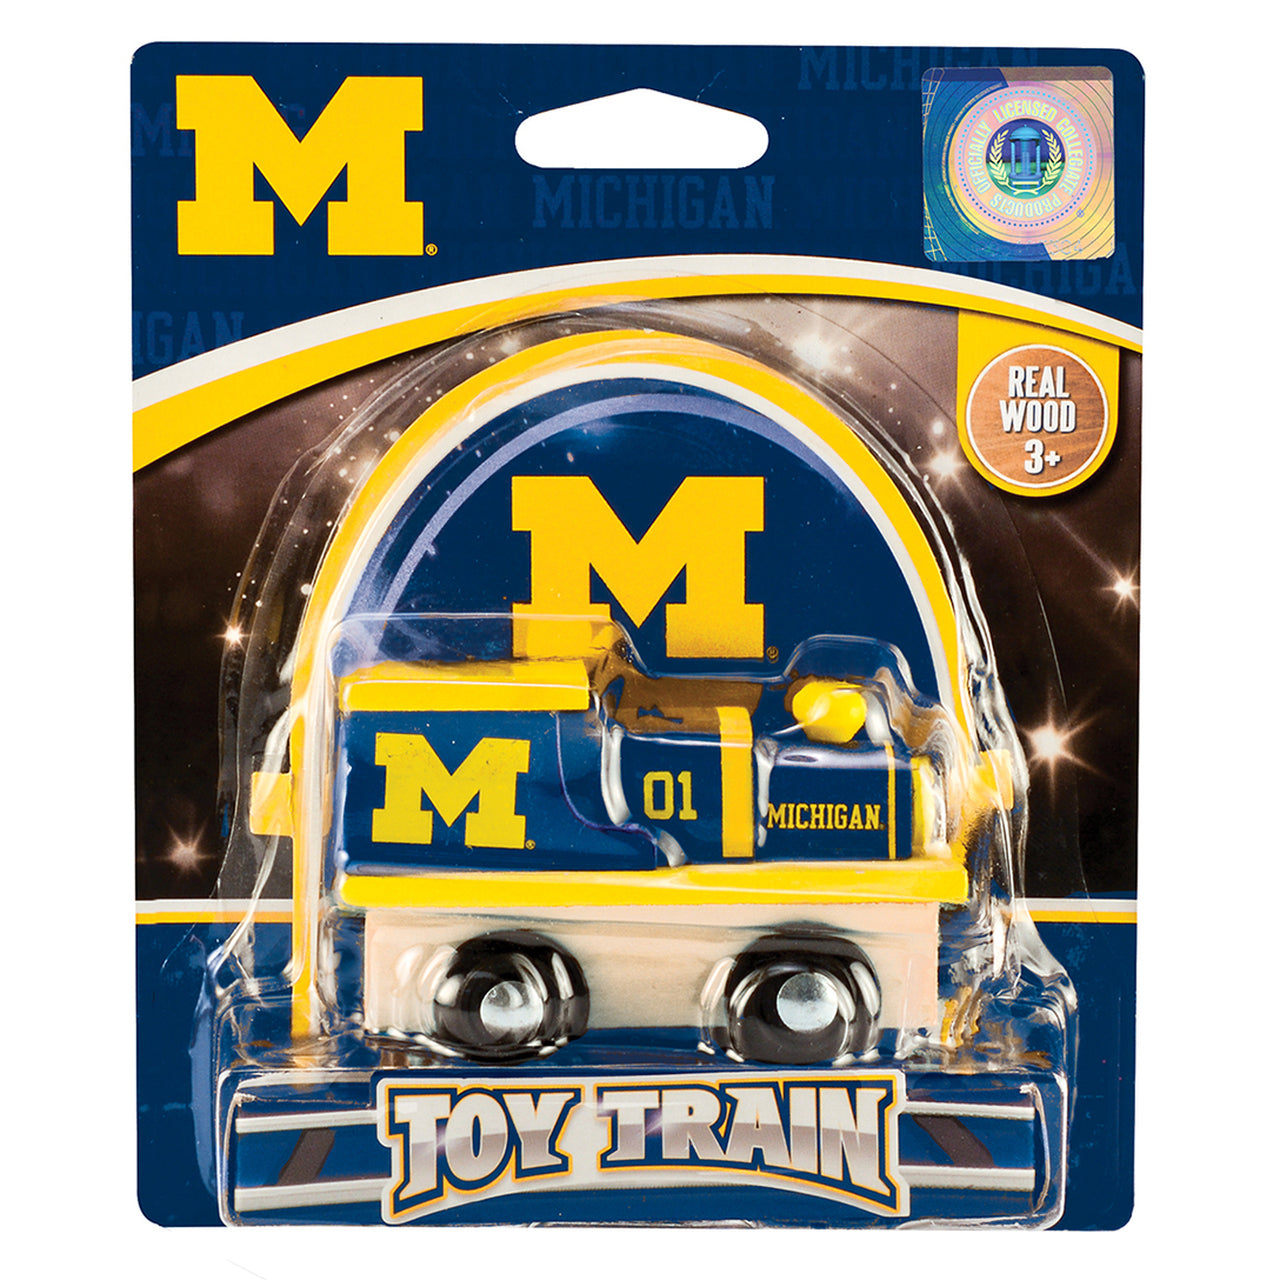 Michigan Wolverines Wooden Toy Train Engine by Masterpieces